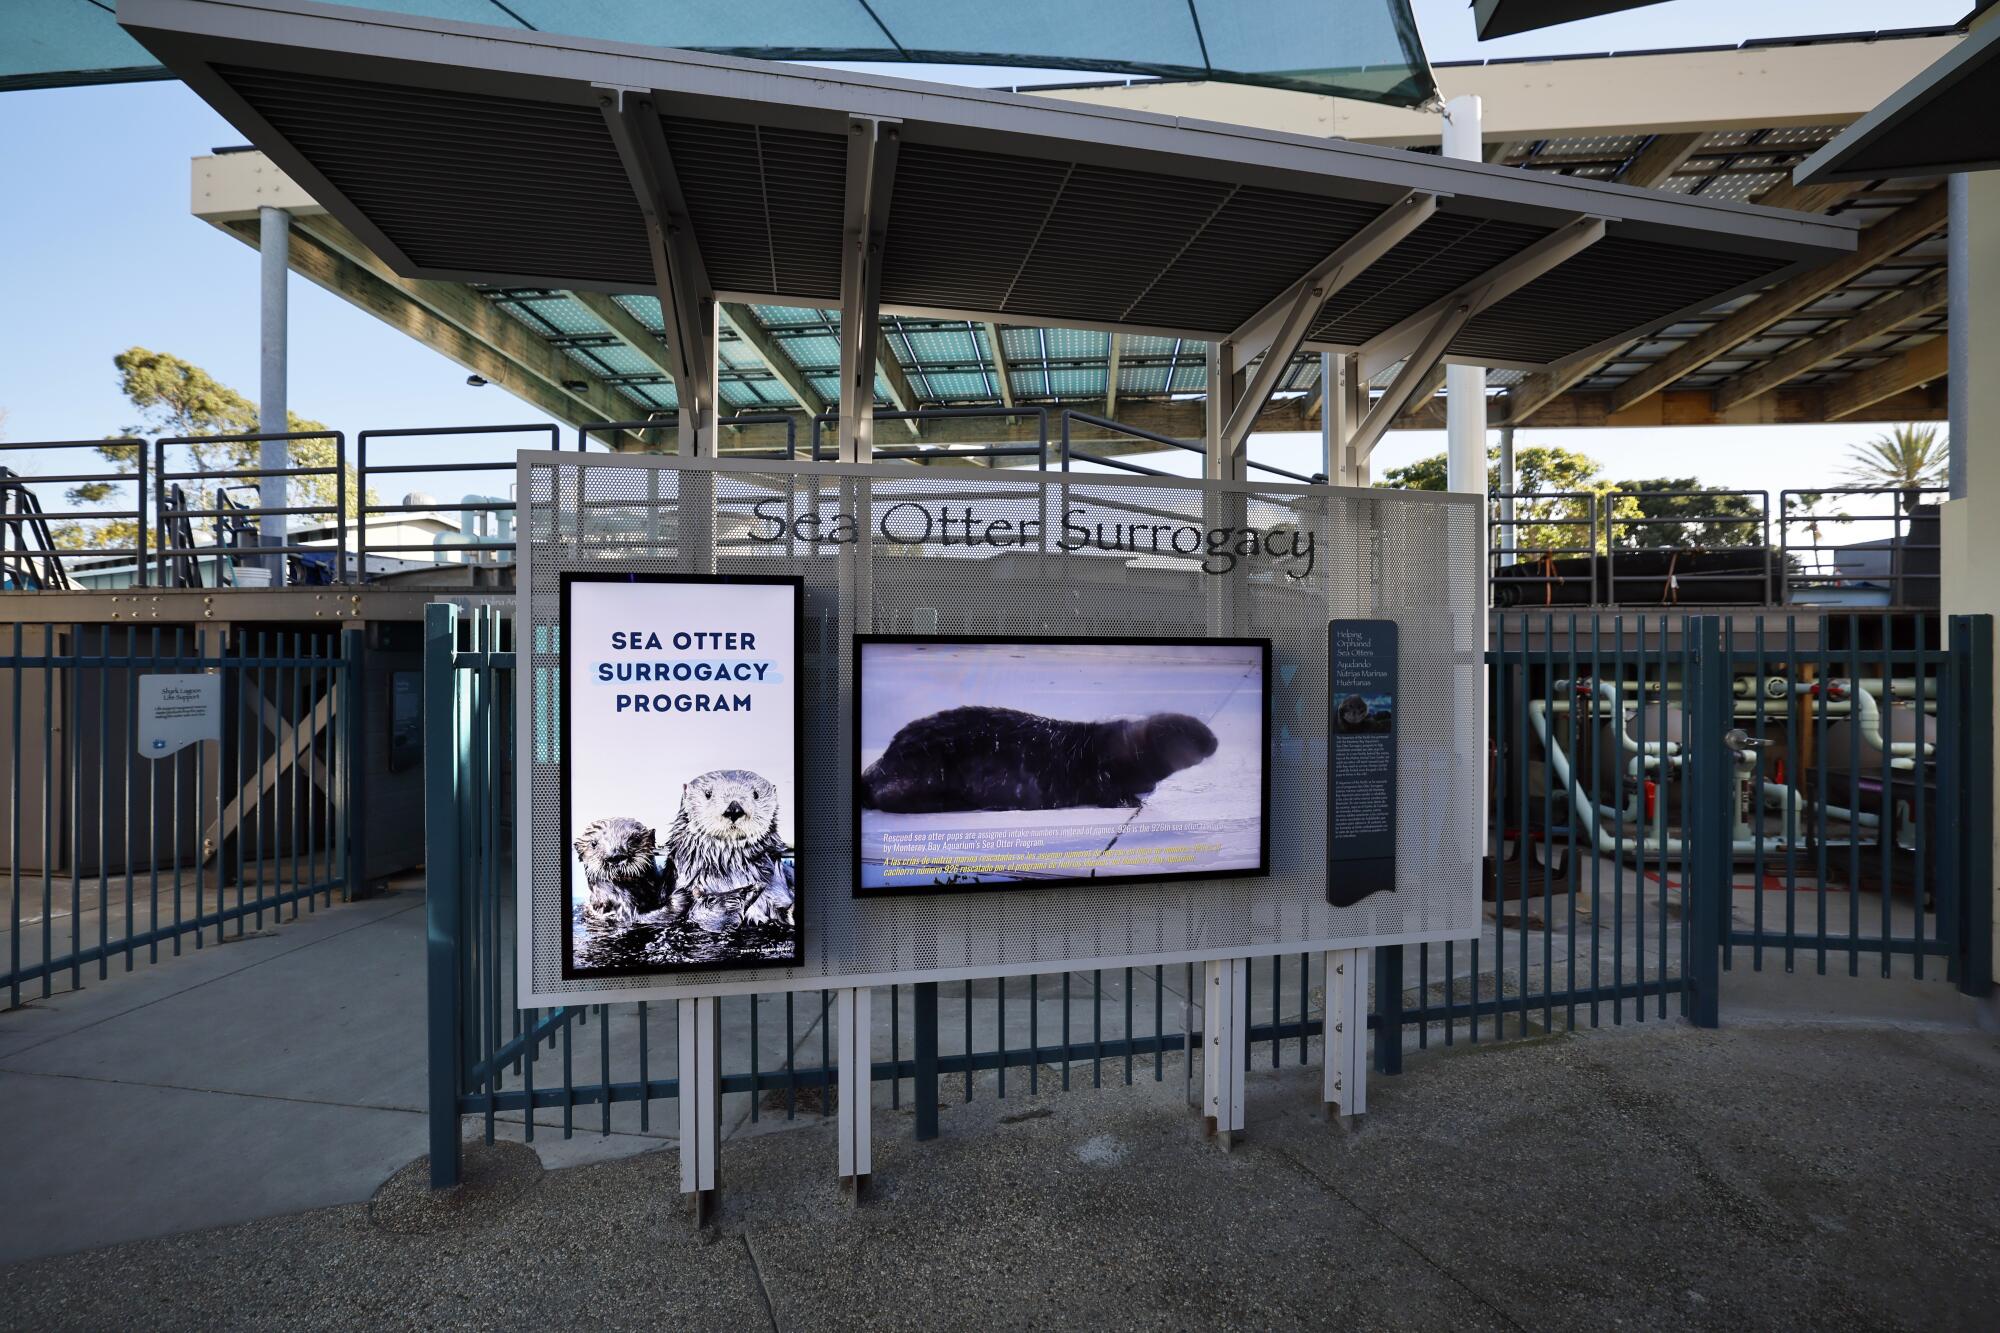 A view of the sea otter surrogacy program exhibit at the Aquarium of the Pacific in Long Beach. 